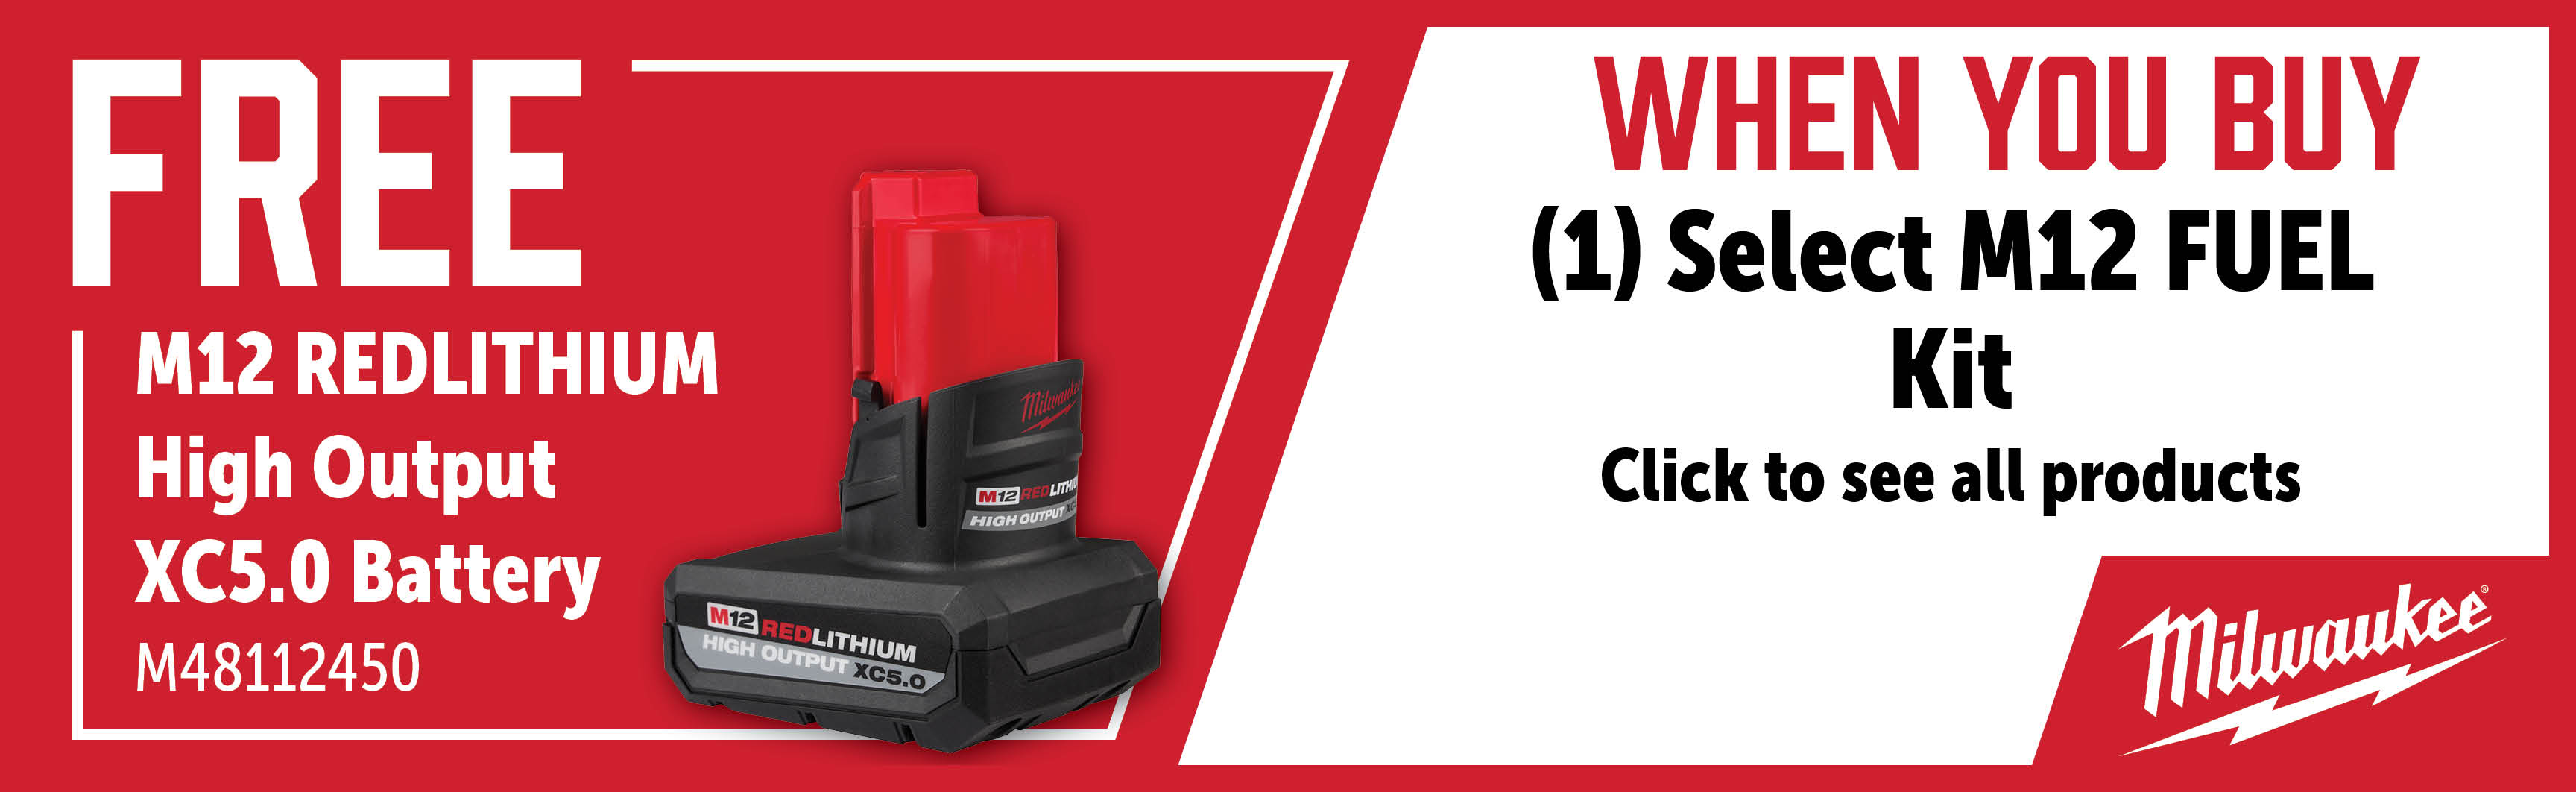 Milwaukee May - July: Buy a Qualifying M12 Kit get a FREE M48112450 M12 Battery Pack 